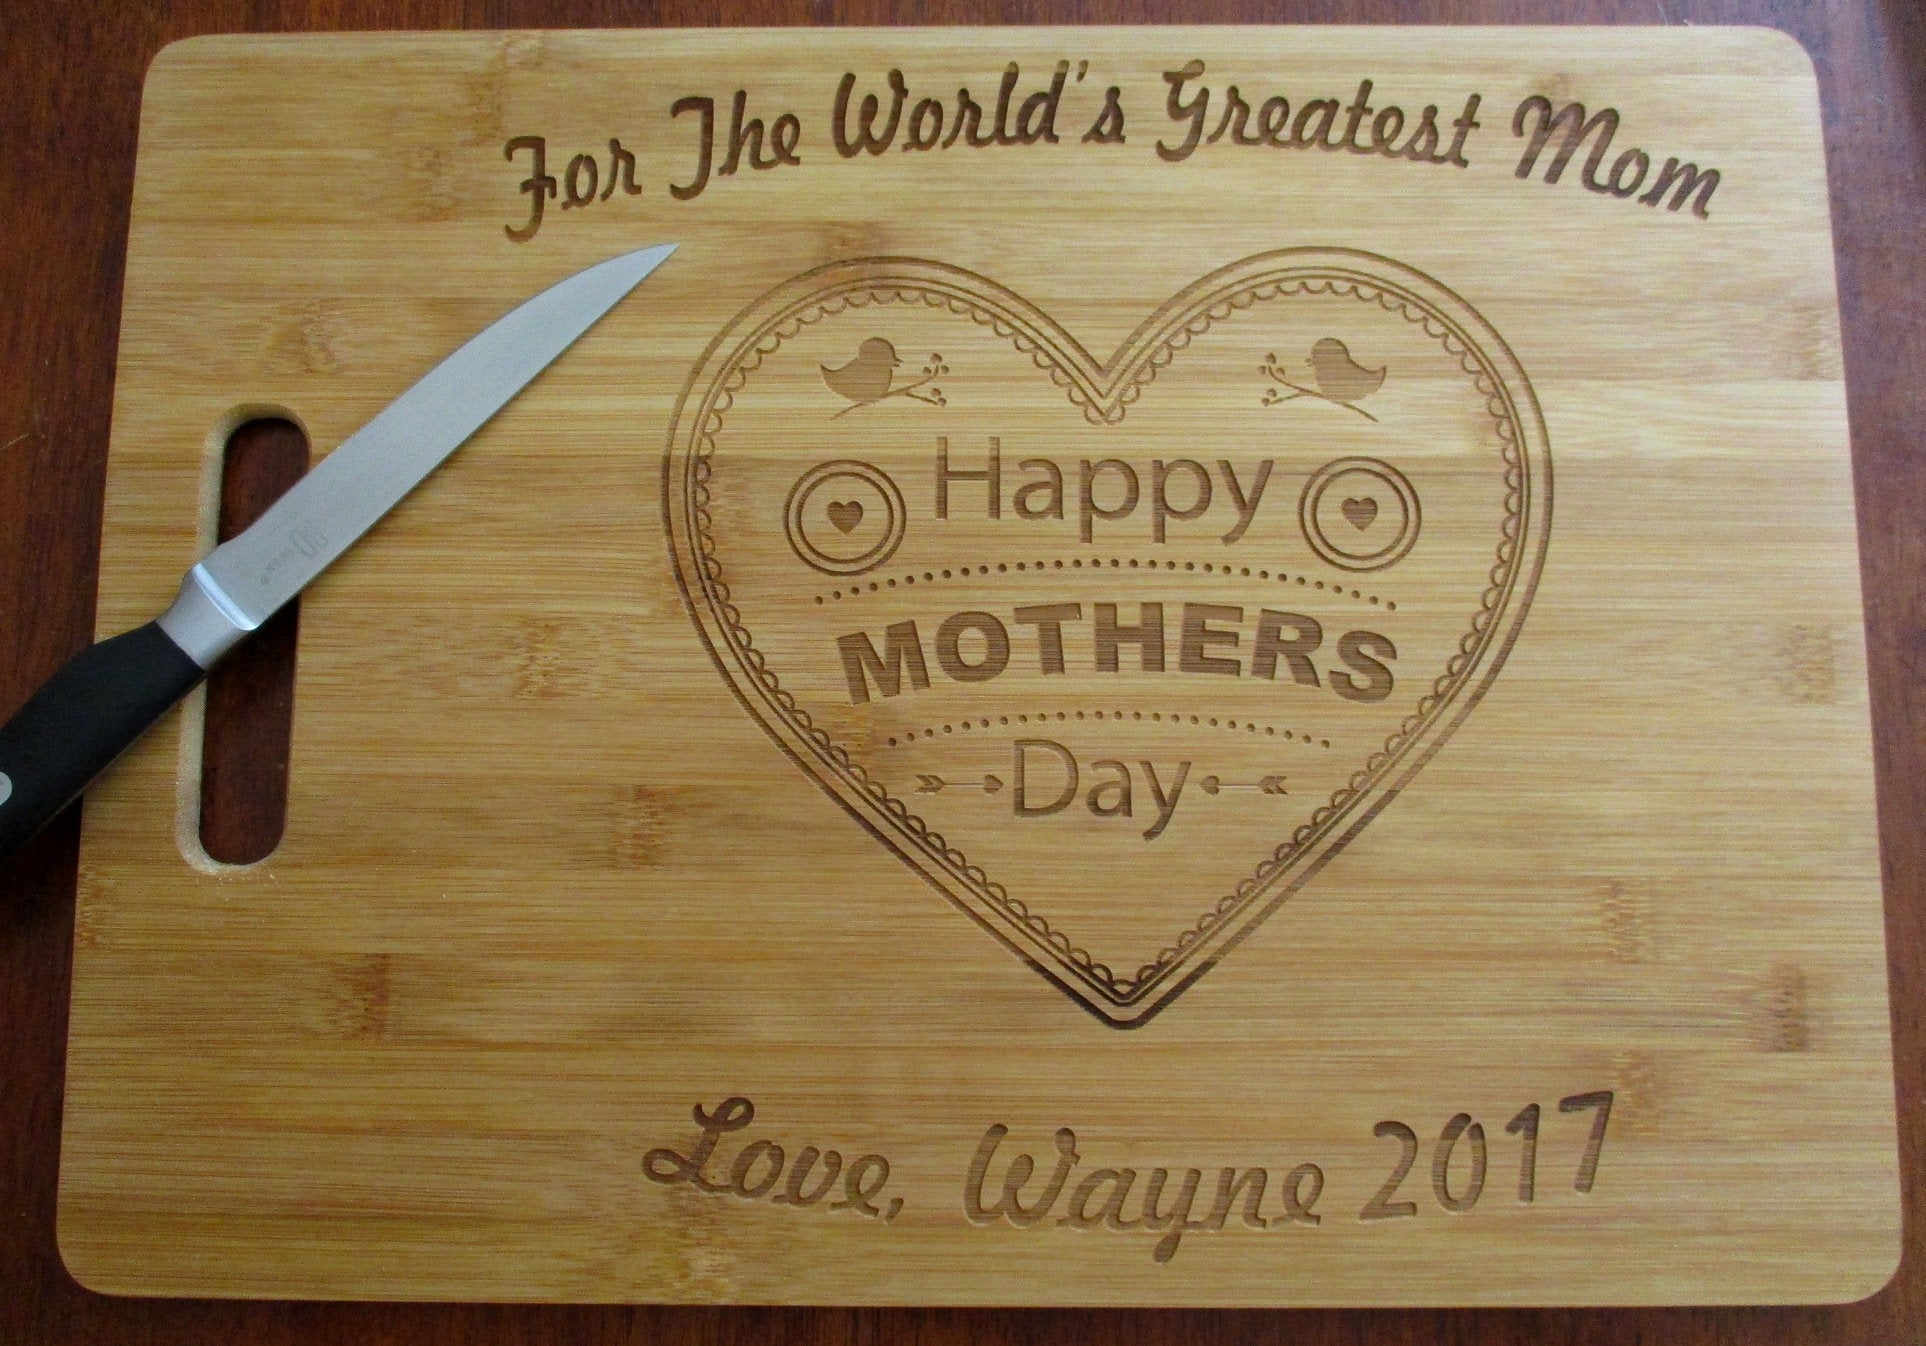  American Laser Crafts Personalized Mom Cutting Board